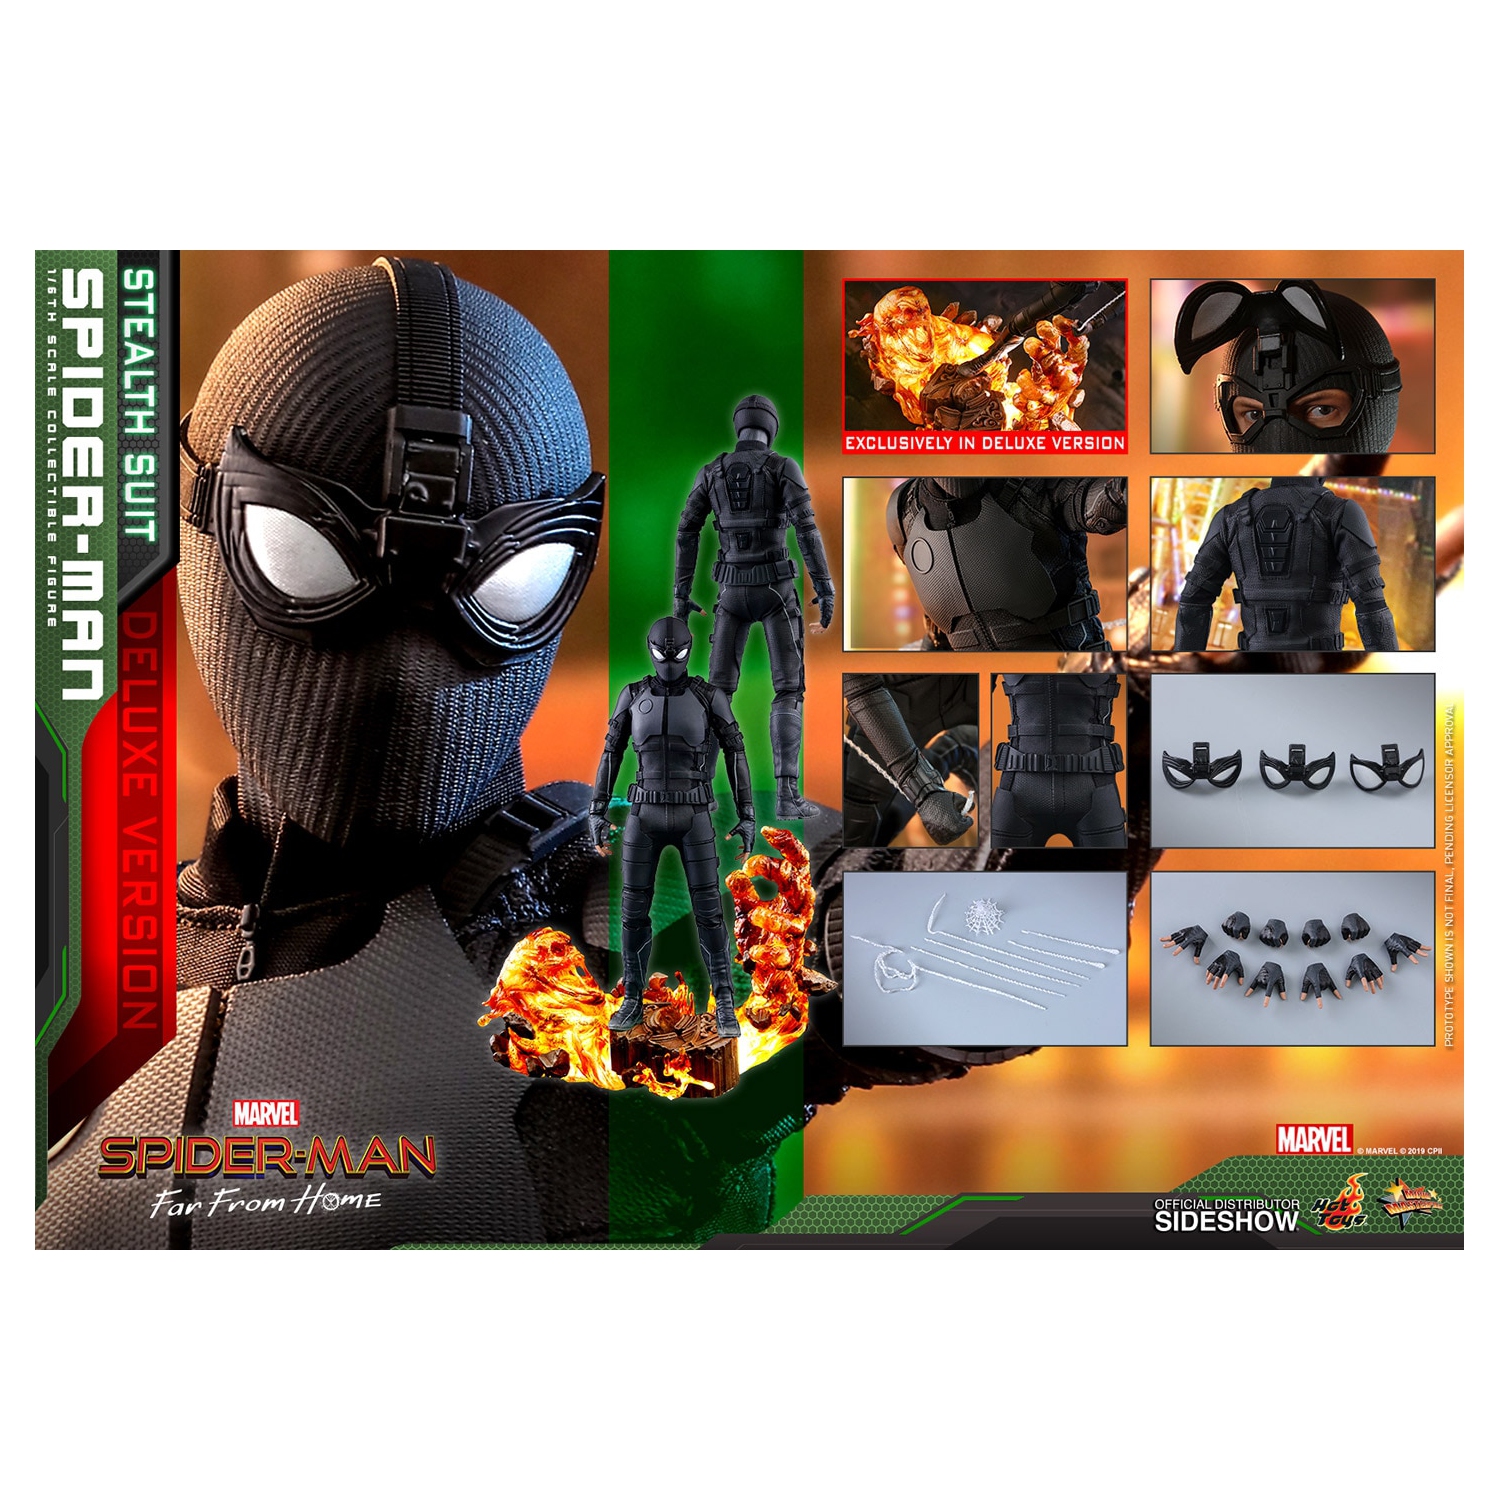 Spider-Man Far From Home 12 Inch Figure 1/6 Scale - Spider-Man (Stealth Suit) Deluxe Version Hot Toys 904858